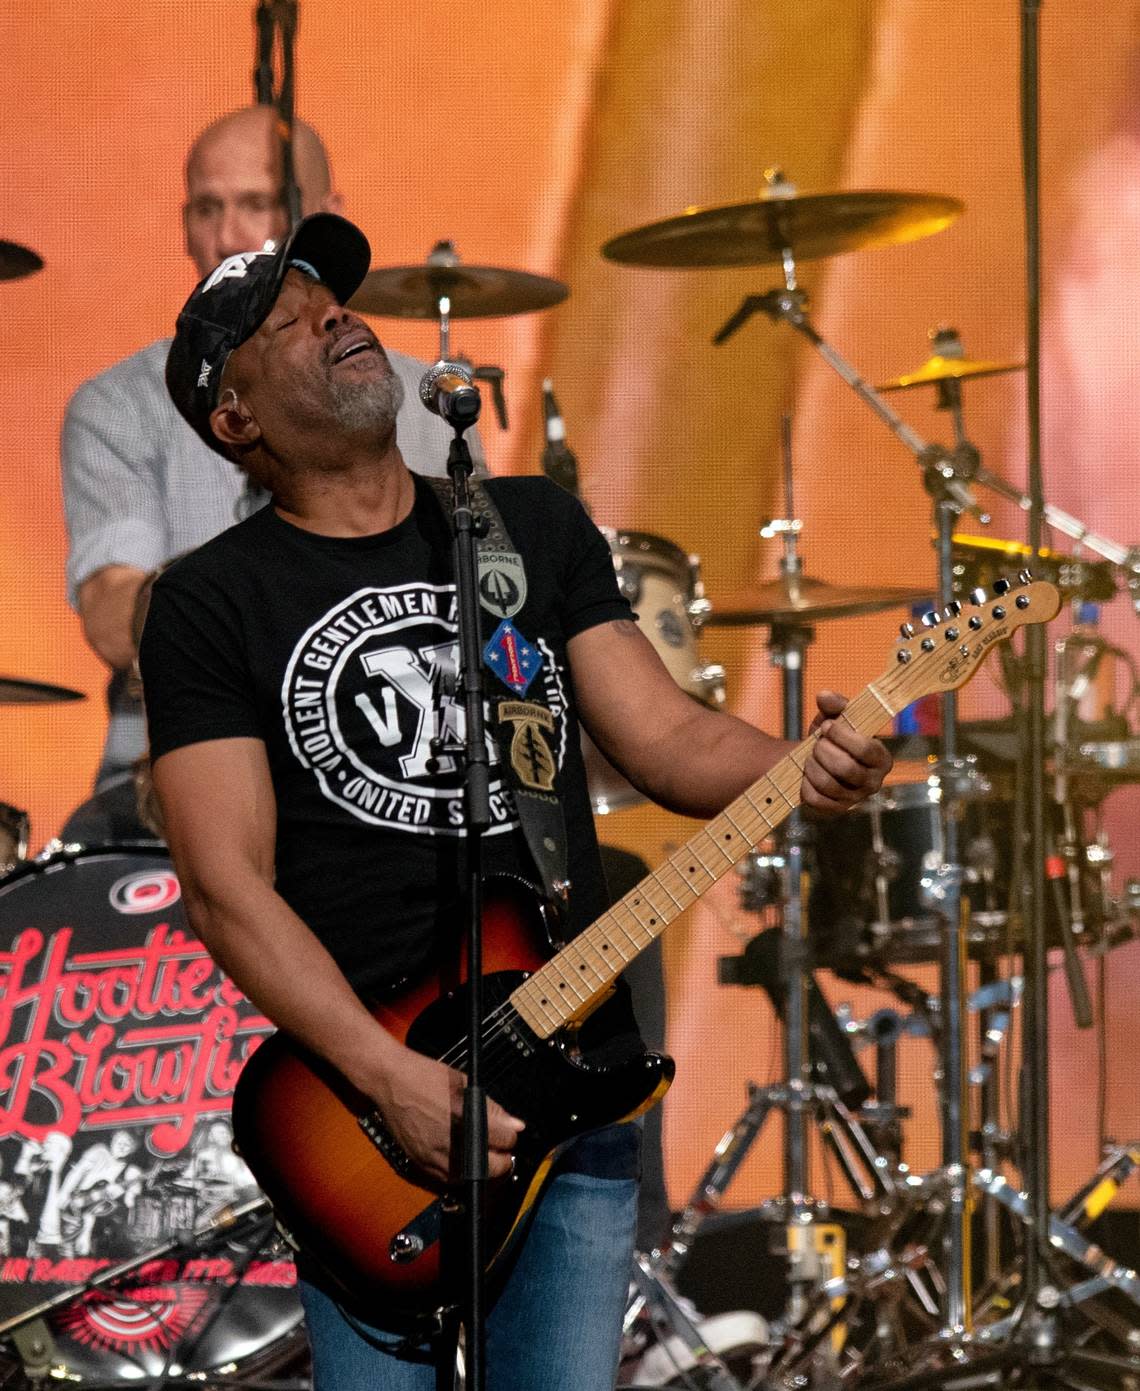 Darius Rucker and Hootie in the Blowfish play Raleigh’s PNC Arena, Friday night, Feb. 17, 2023.